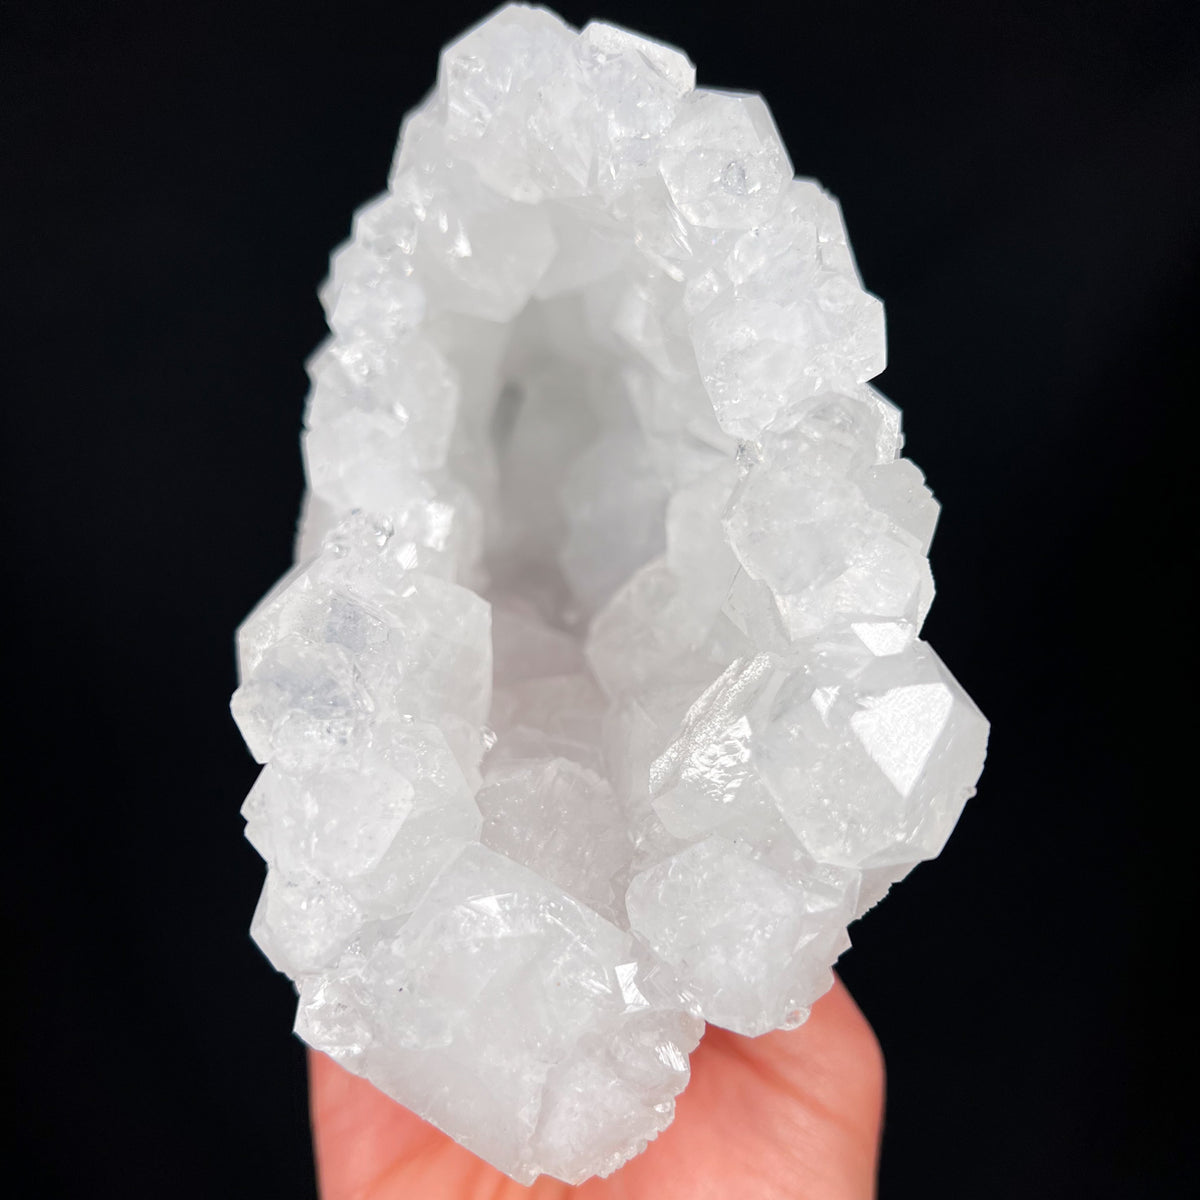 Central View of an Apophyllite Crystal Cast